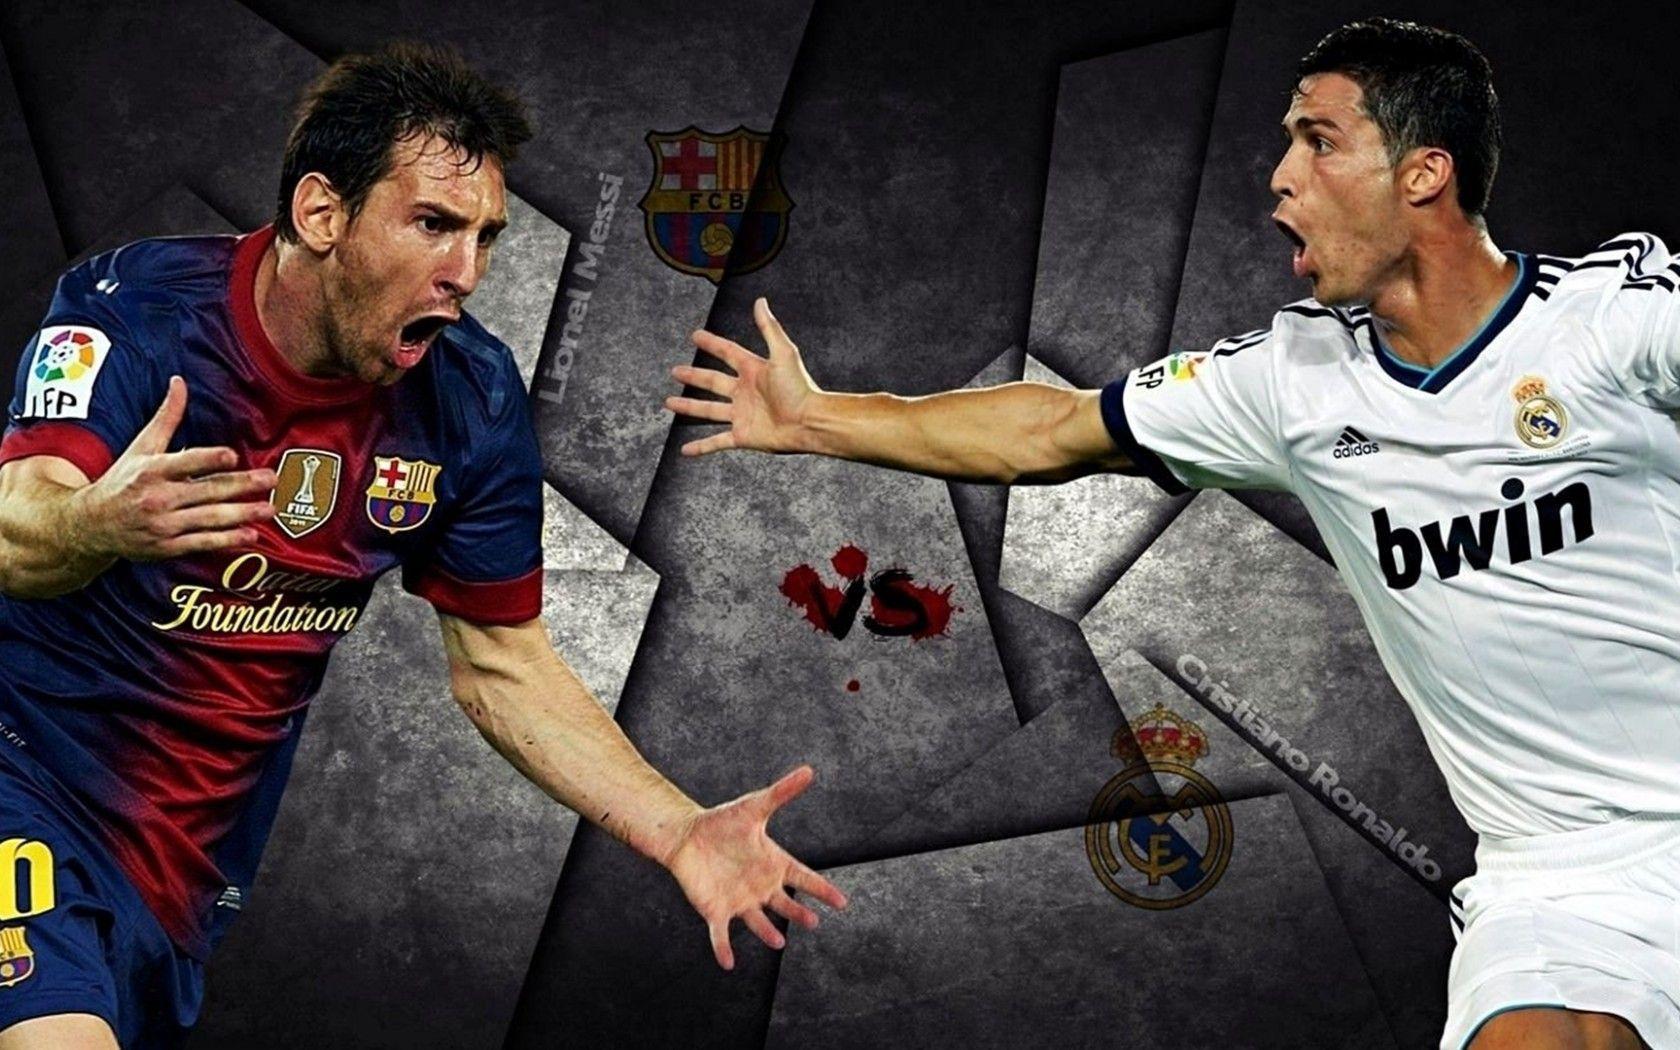 A wallpaper of messi and cristiano by MouH by MouHGrfx on DeviantArt